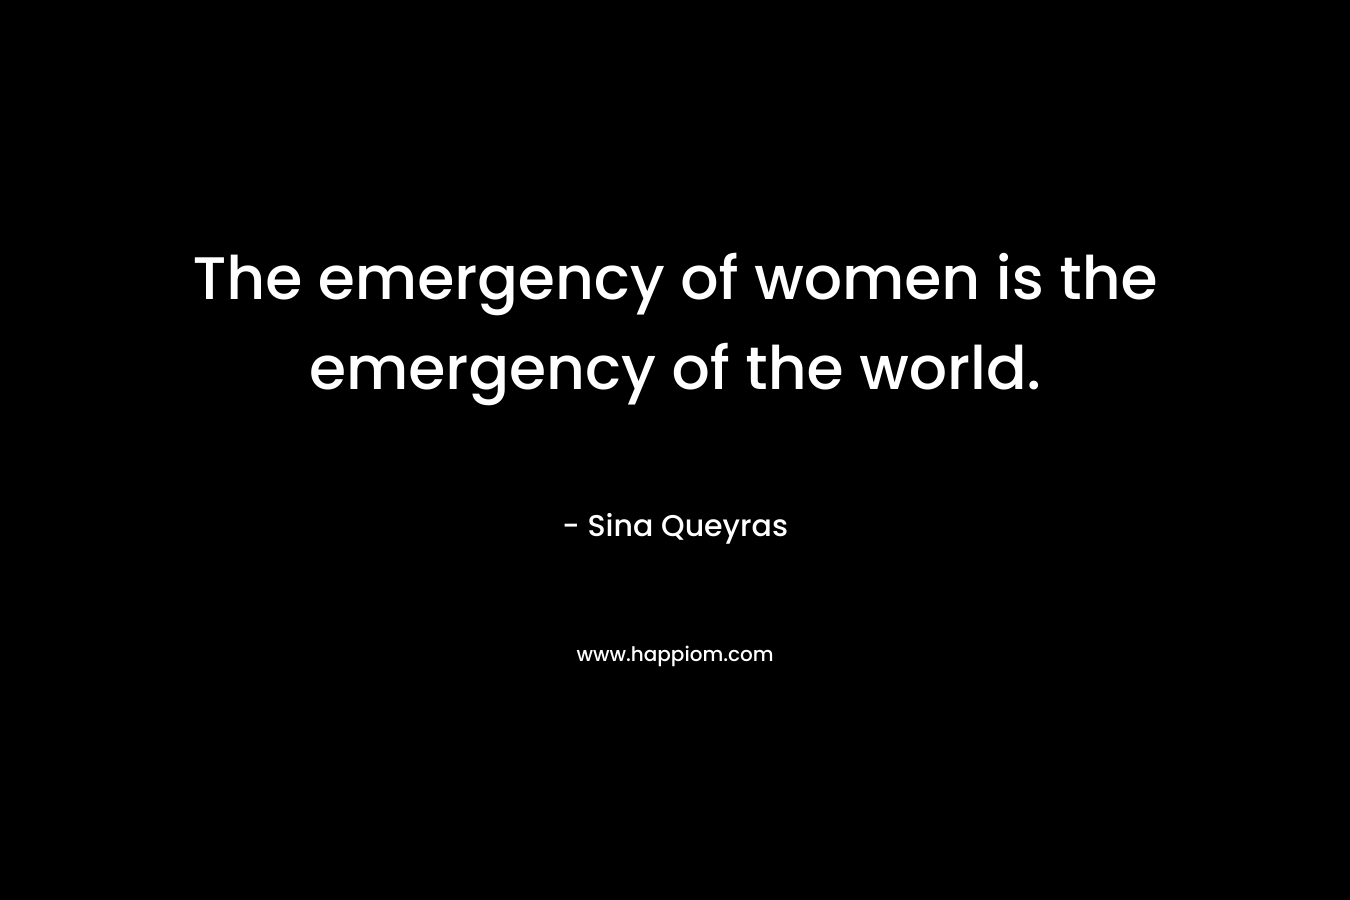 The emergency of women is the emergency of the world. – Sina Queyras